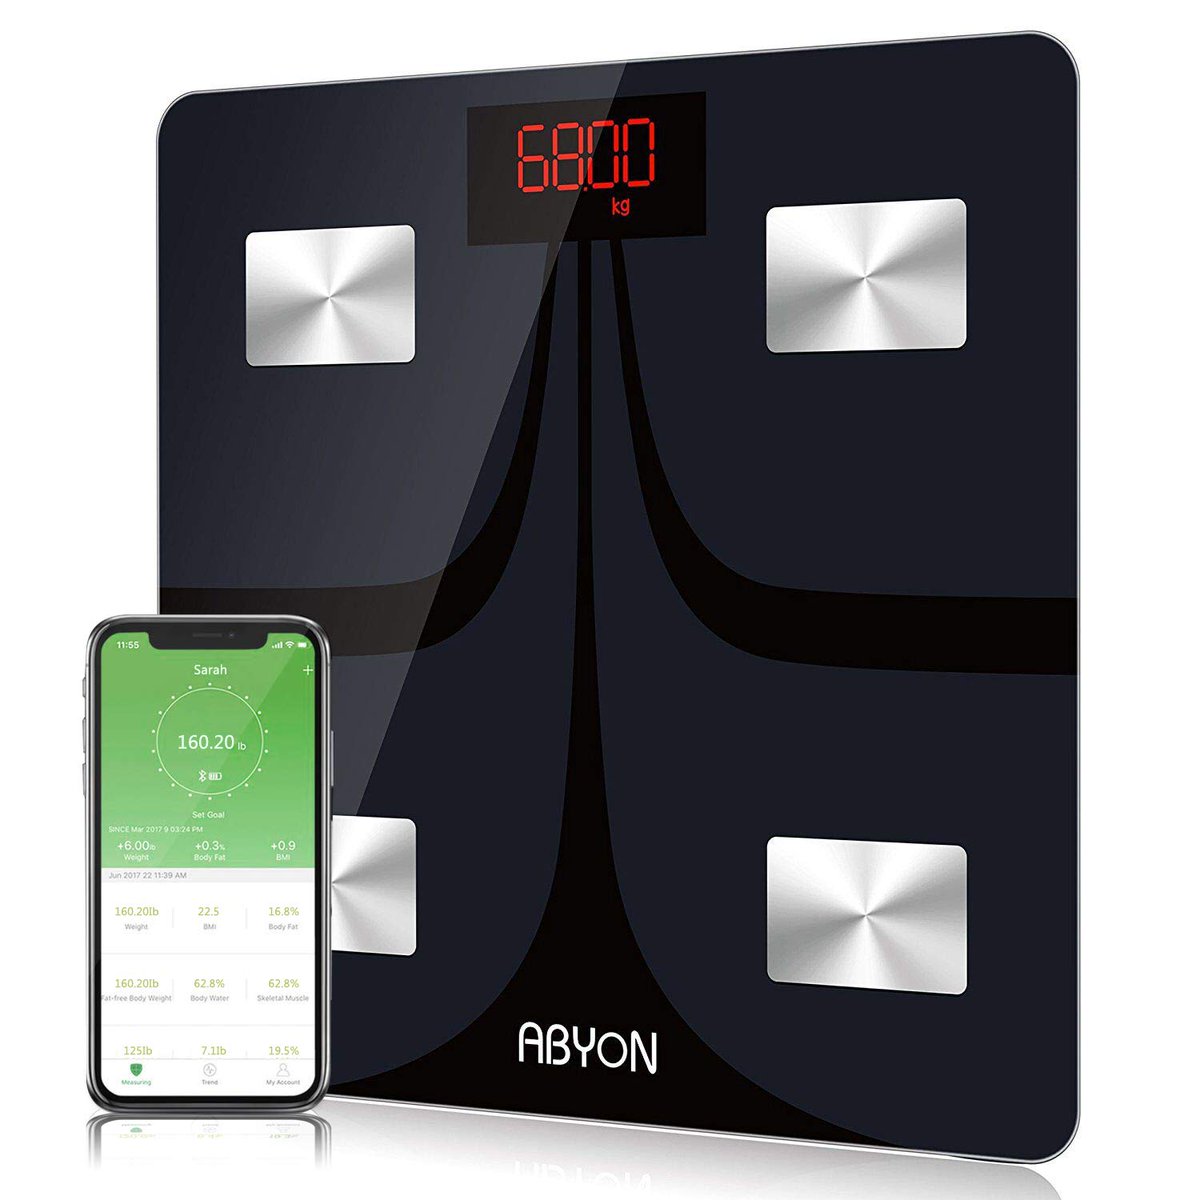 Best Bathroom Scales 
Reviews By The Wild Trend
Choose the best one bathroom scale
More InFo: thewildtrend.com/best-bathroom-…
Save you Money and time
#bathroom #bathroomscale #bathroomassesories #bathscale #scale #digitalscale #bodyfatscale #bodyscale #weightScale